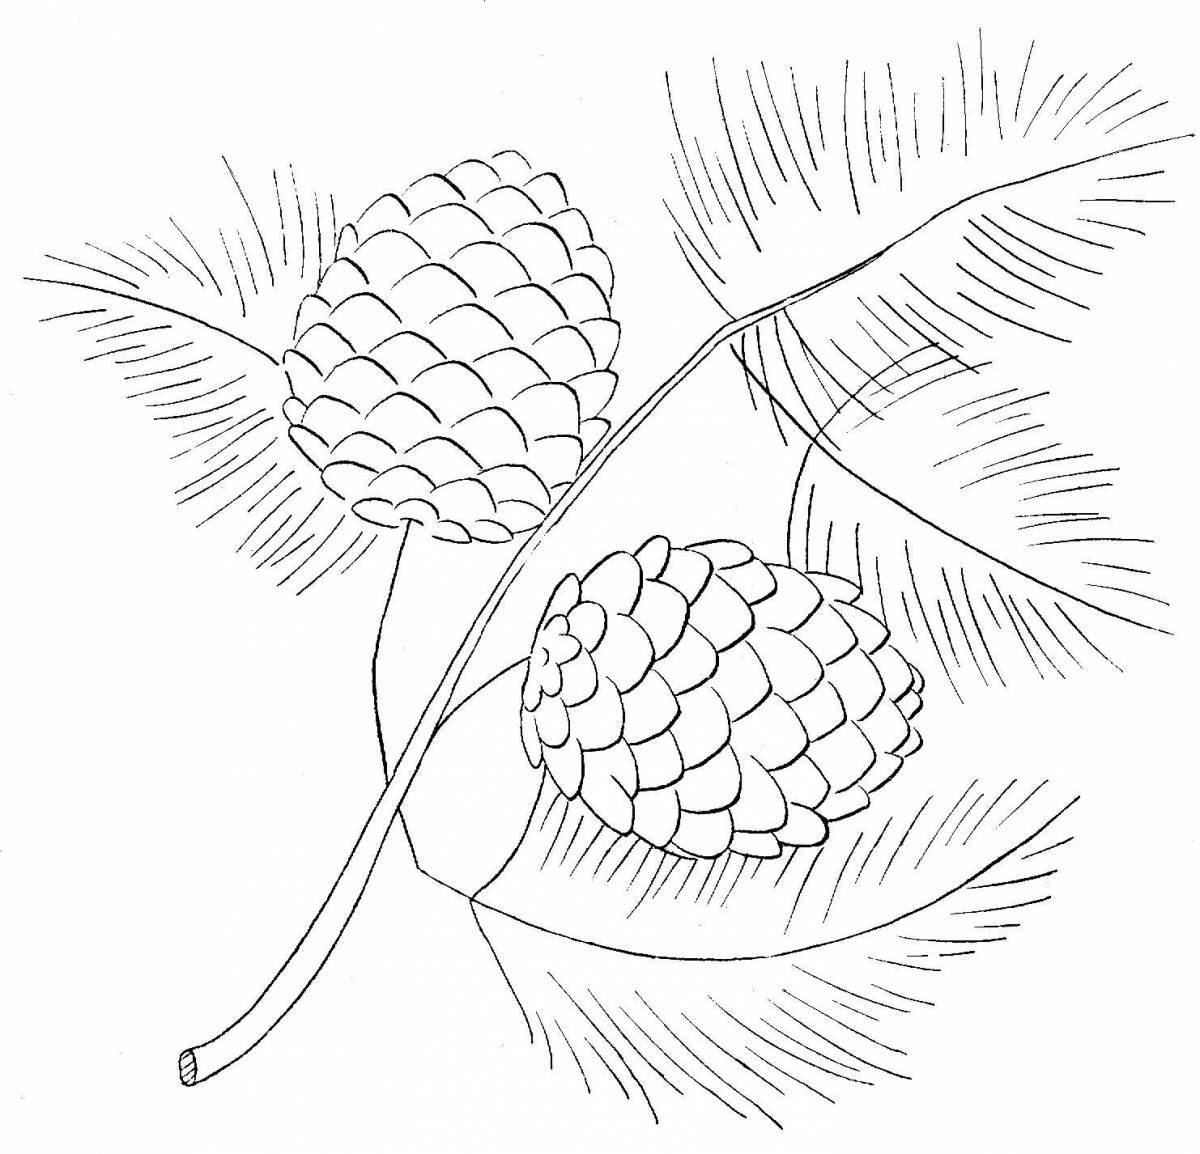 Wonderful spruce branch coloring book for kids